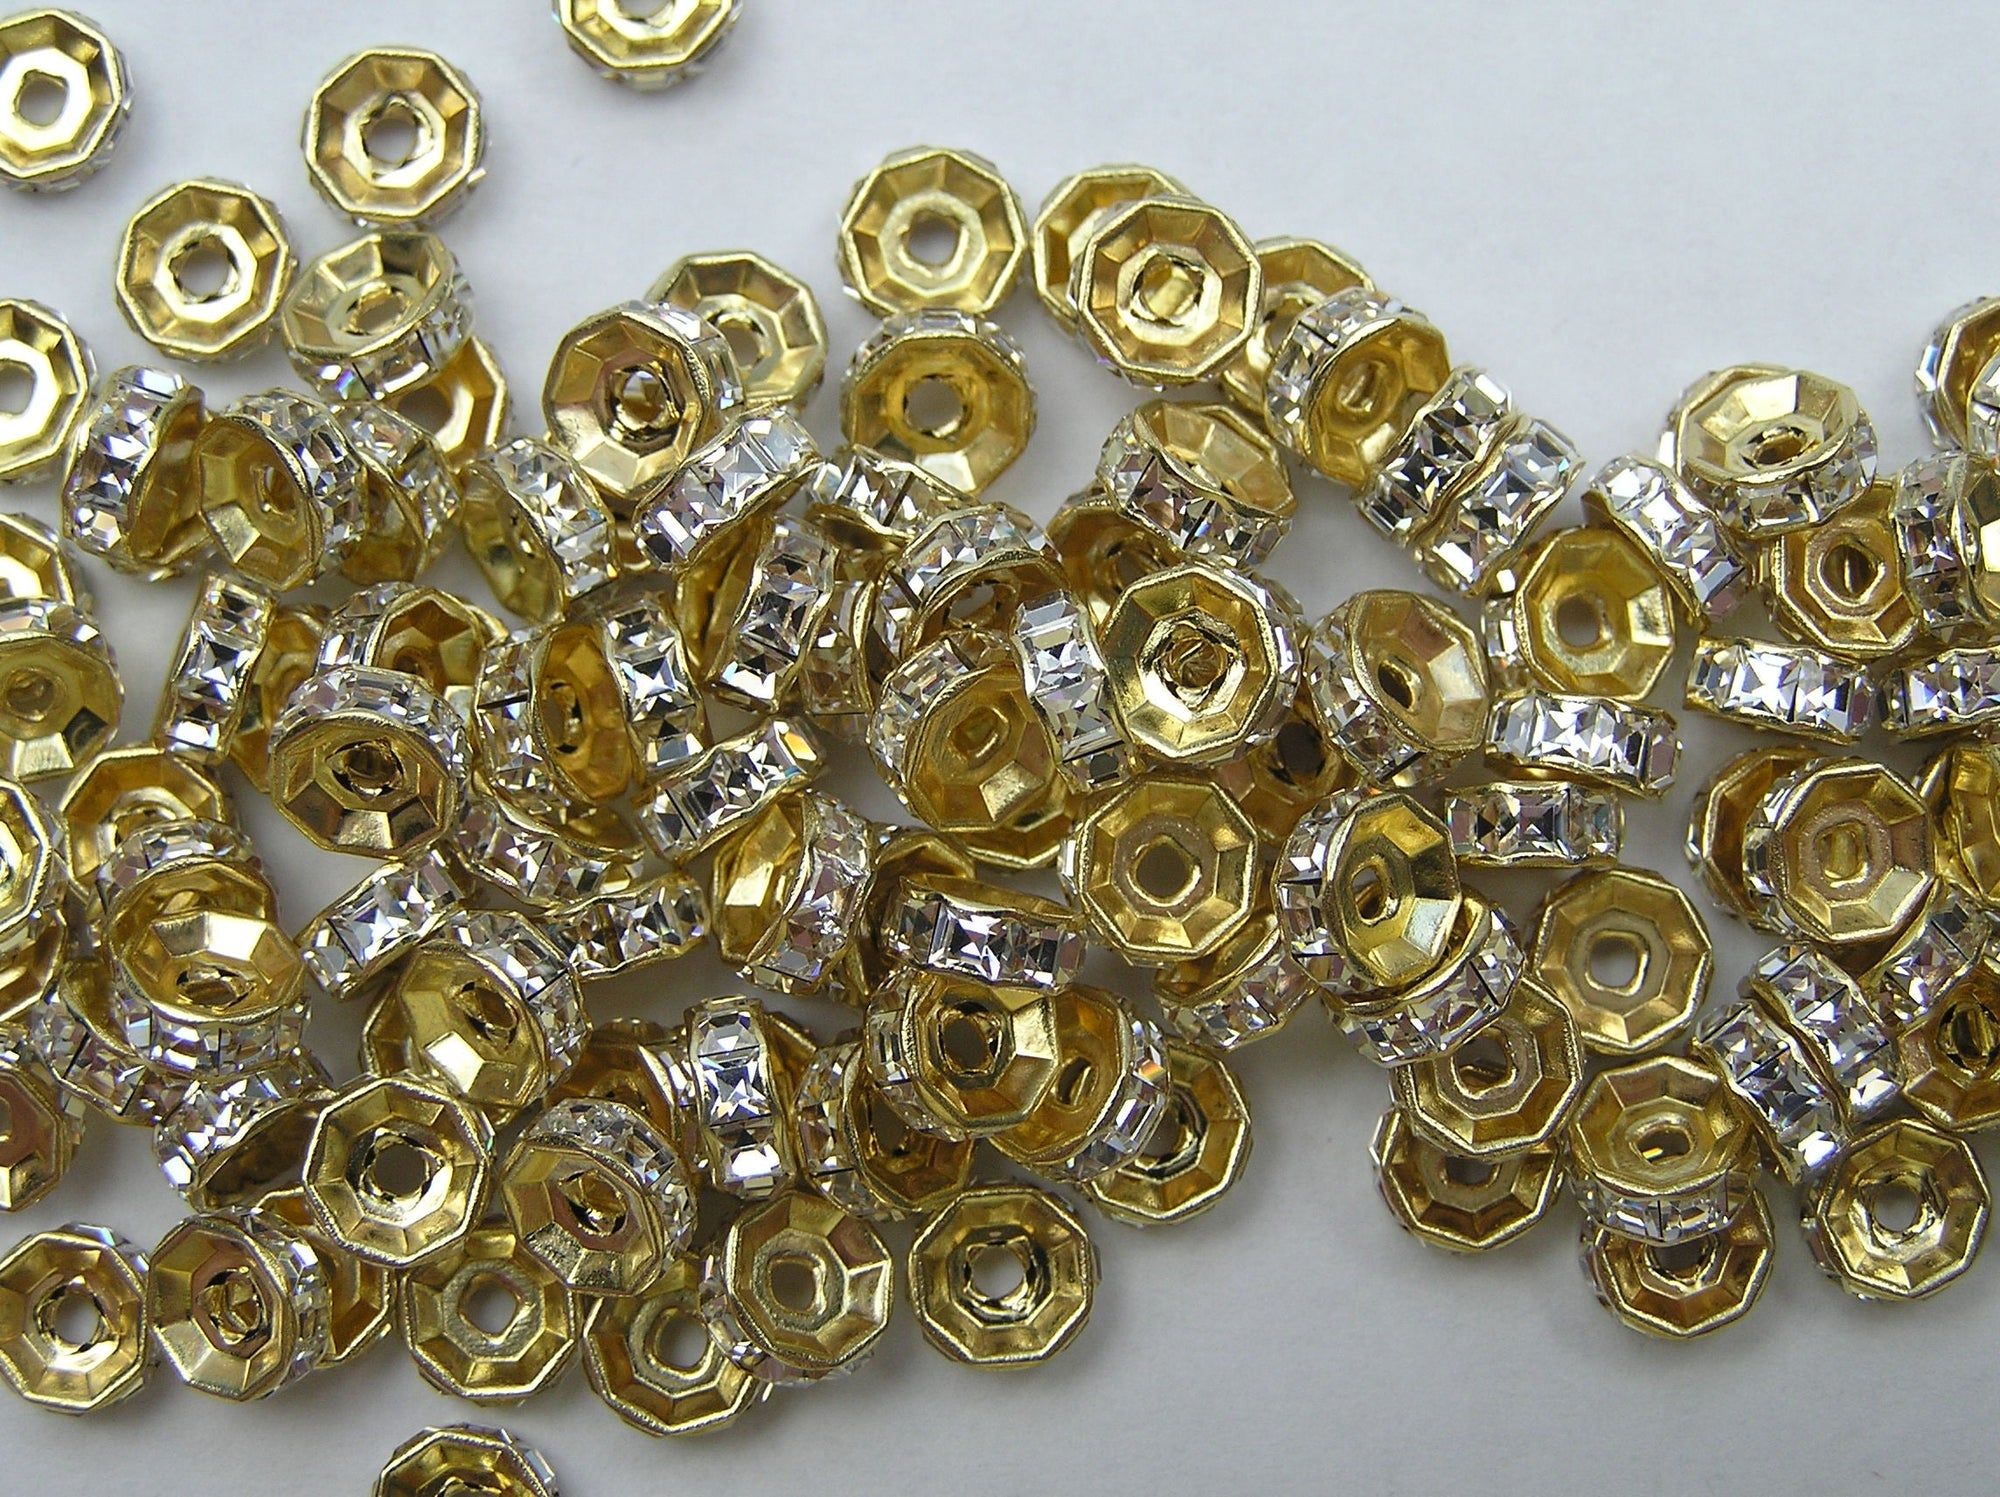 Swarovski Rhinestone Rondelles with Square Stones 8mm Crystal Clear Gold Plated 12pcs J339